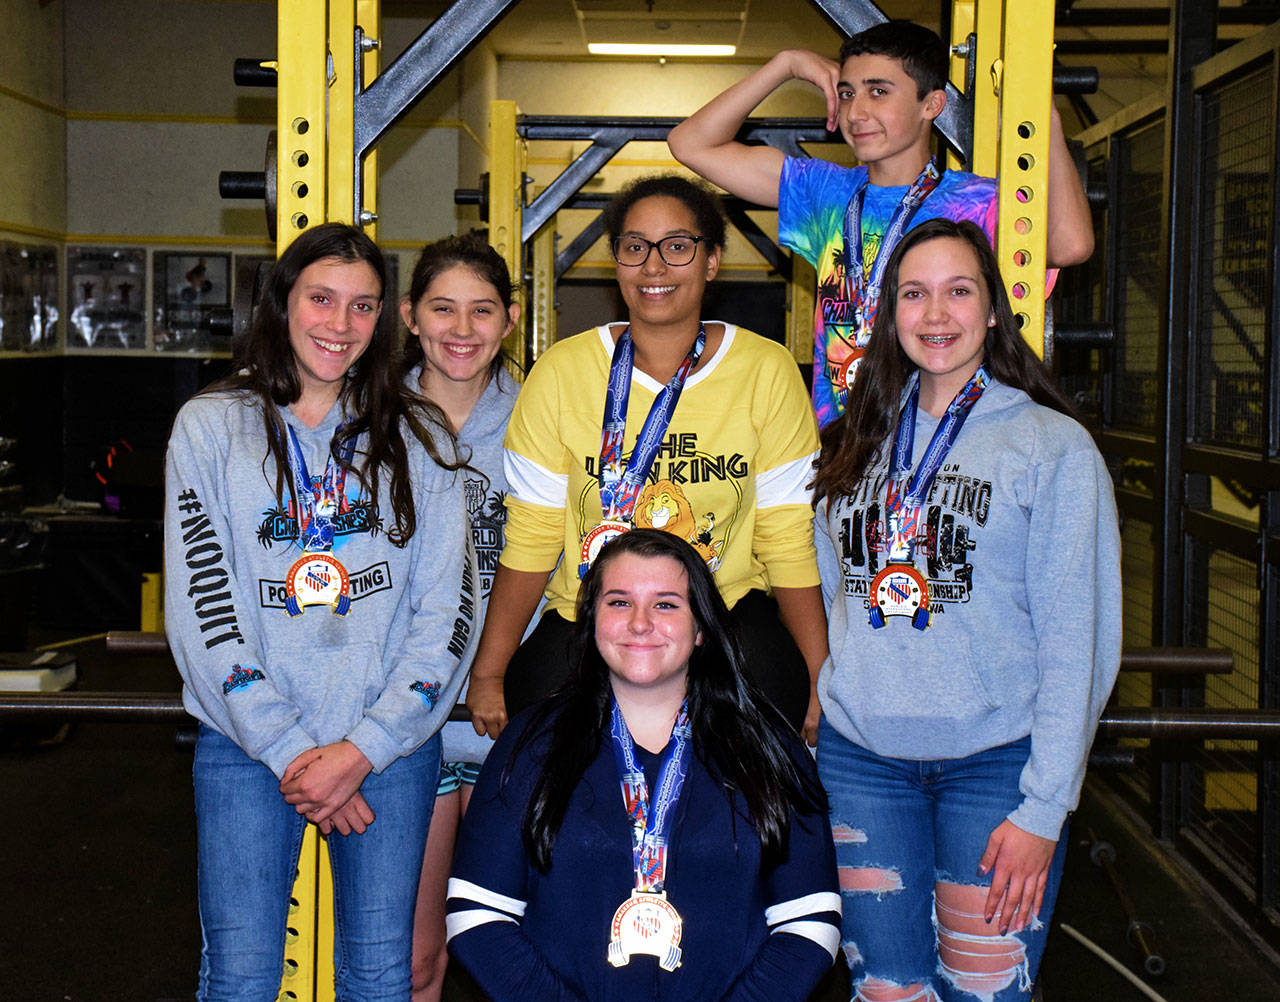 North Beach powerlifters bring home World gold medals